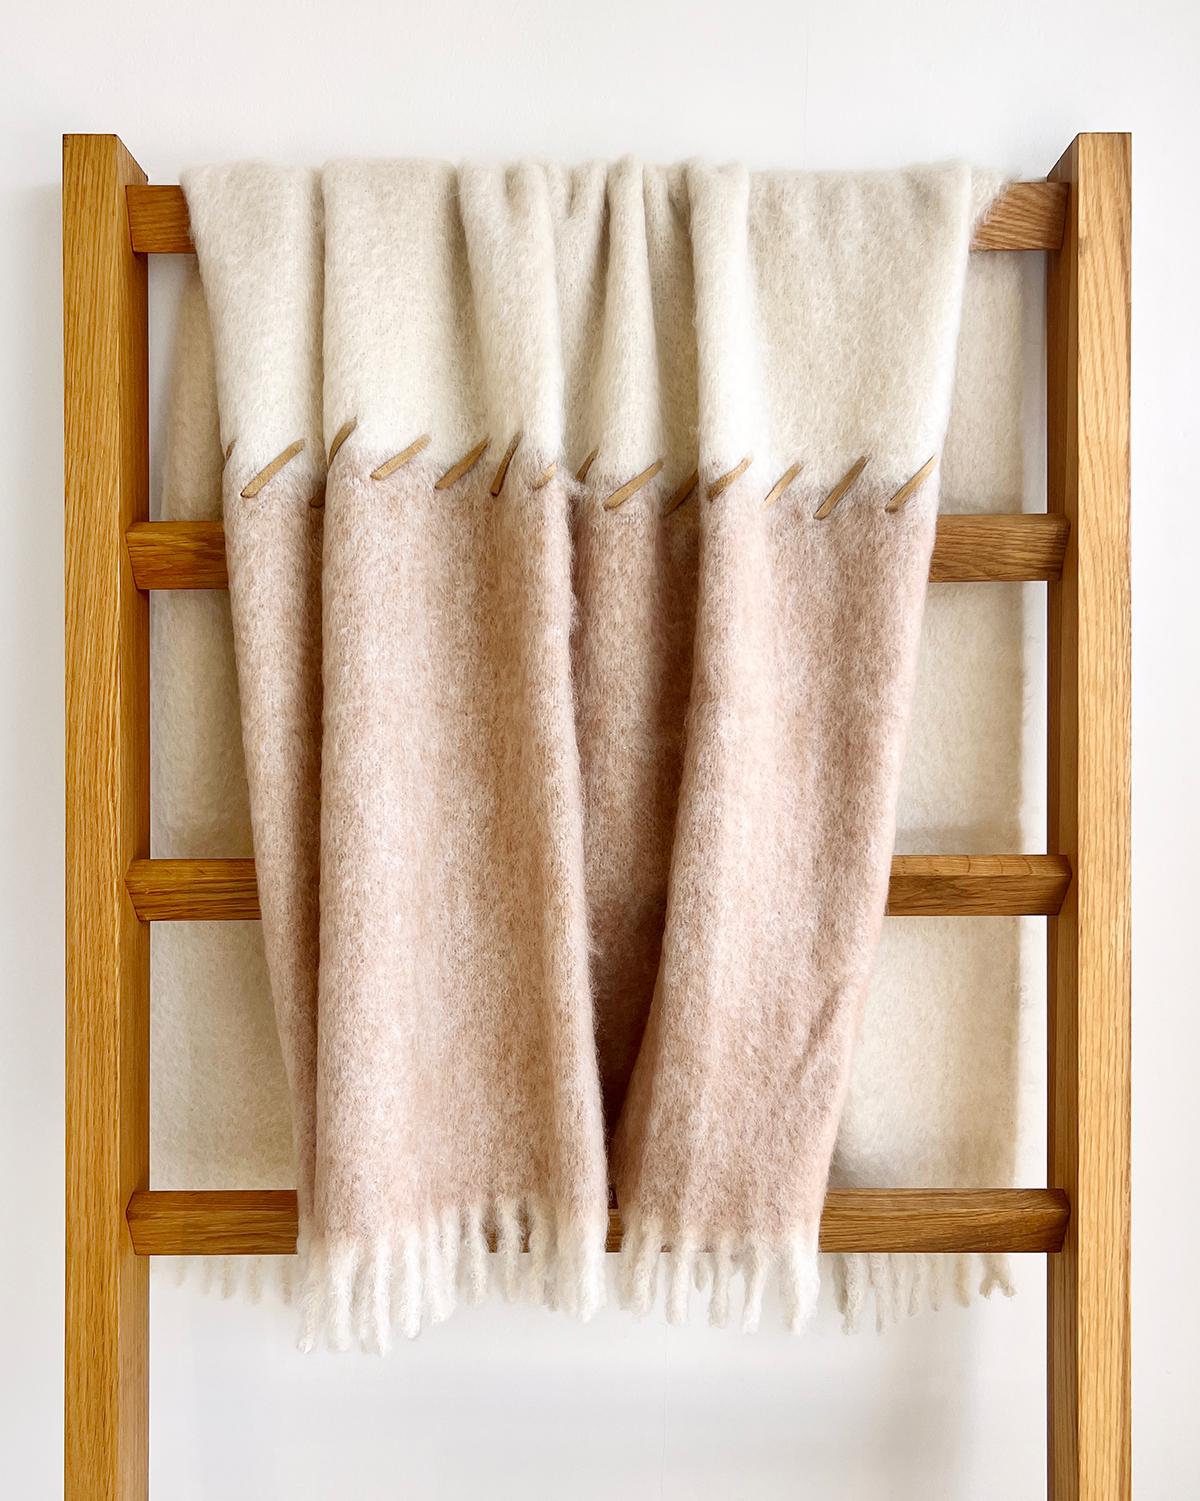 Spanish Mantas Ezcaray Oatmeal Beige and Cream Mohair Blanket Throw w/ Suede Whipstitch For Sale